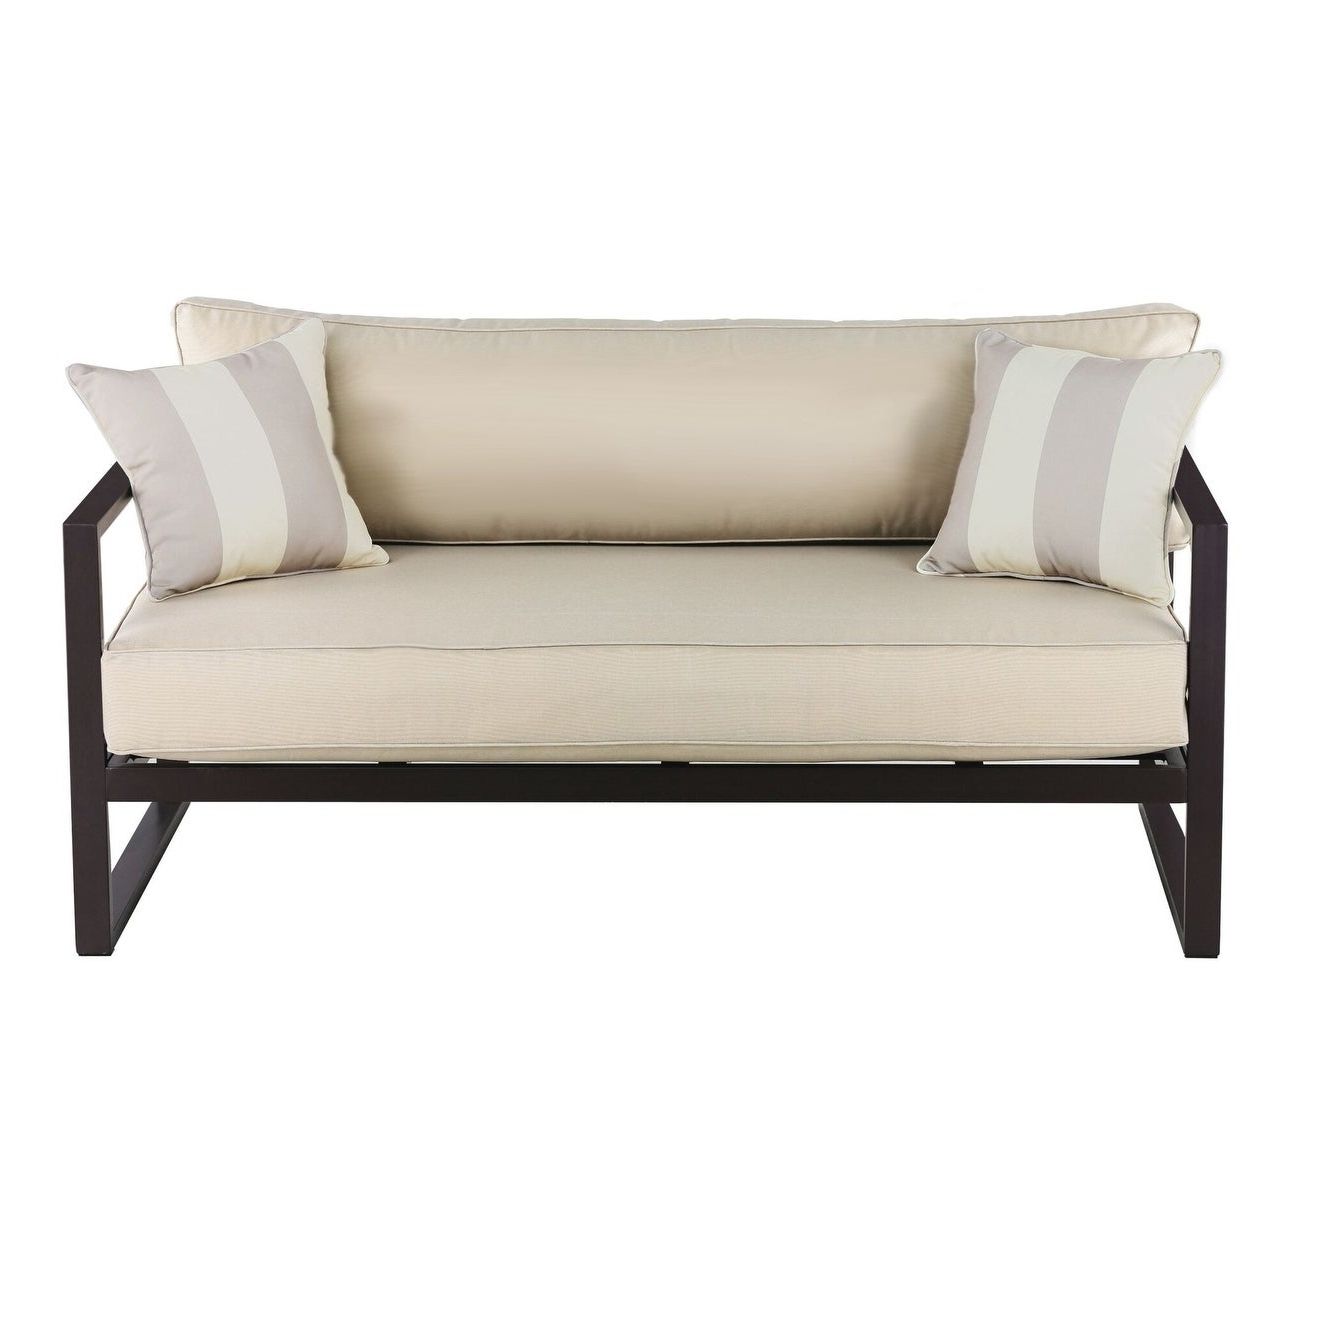 Serta Catalina Outdoor Sofa In Bronze With Regard To Latest Catalina Outdoor Sofas With Cushions (View 11 of 11)